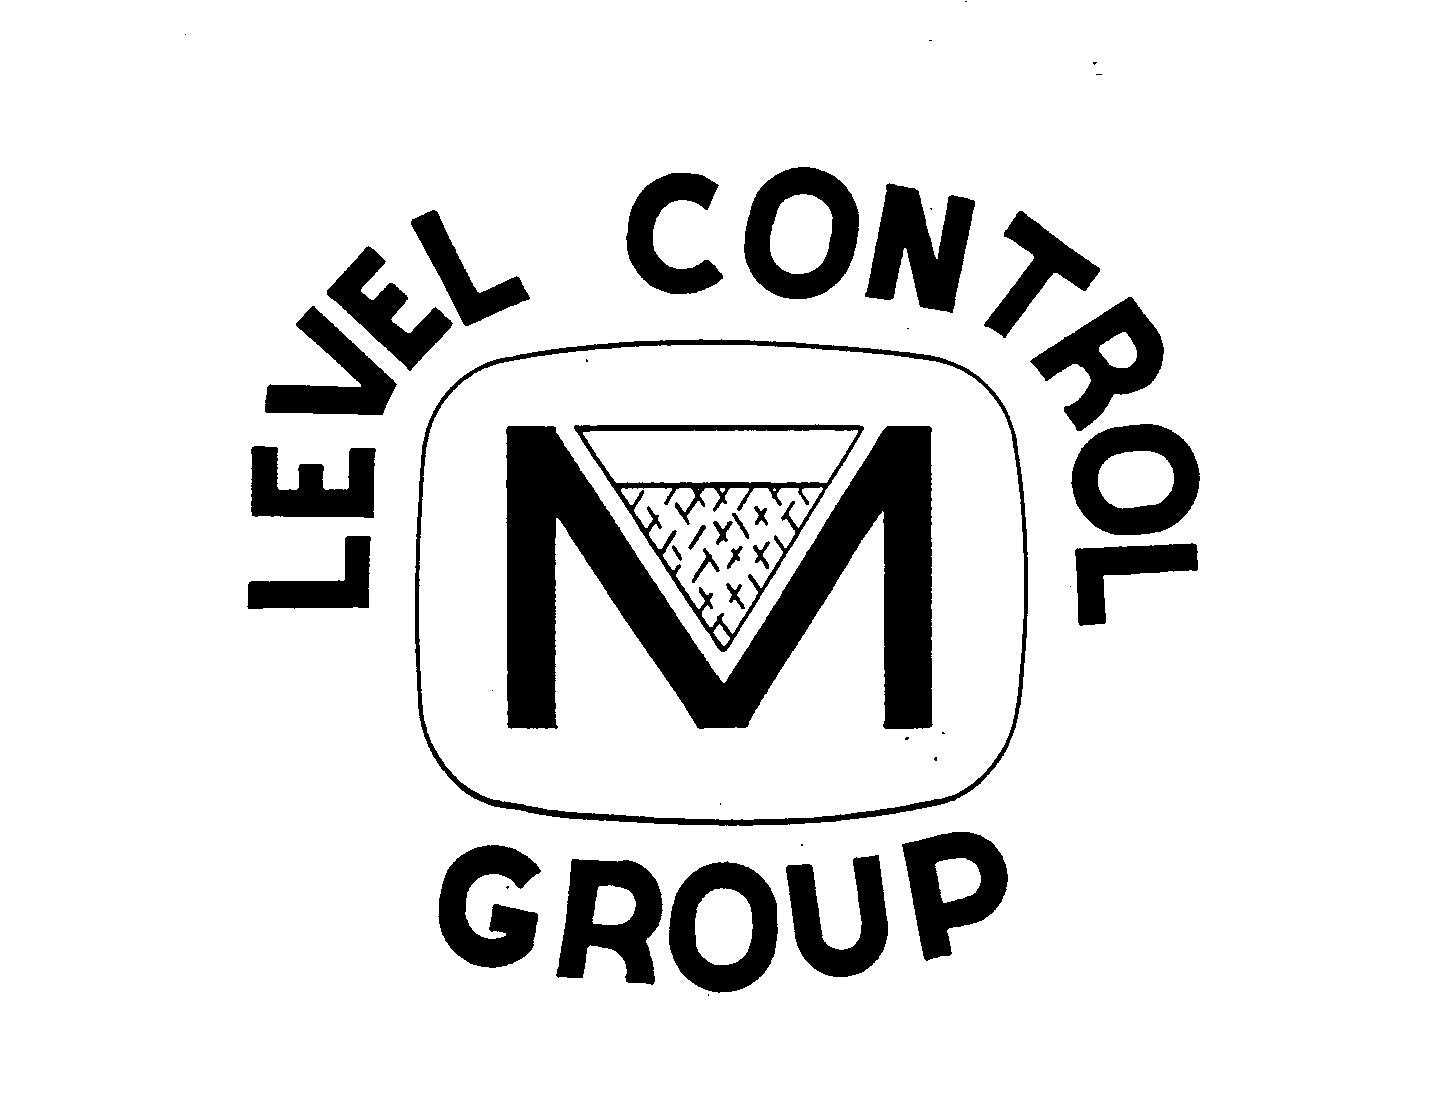  M LEVEL CONTROL GROUP